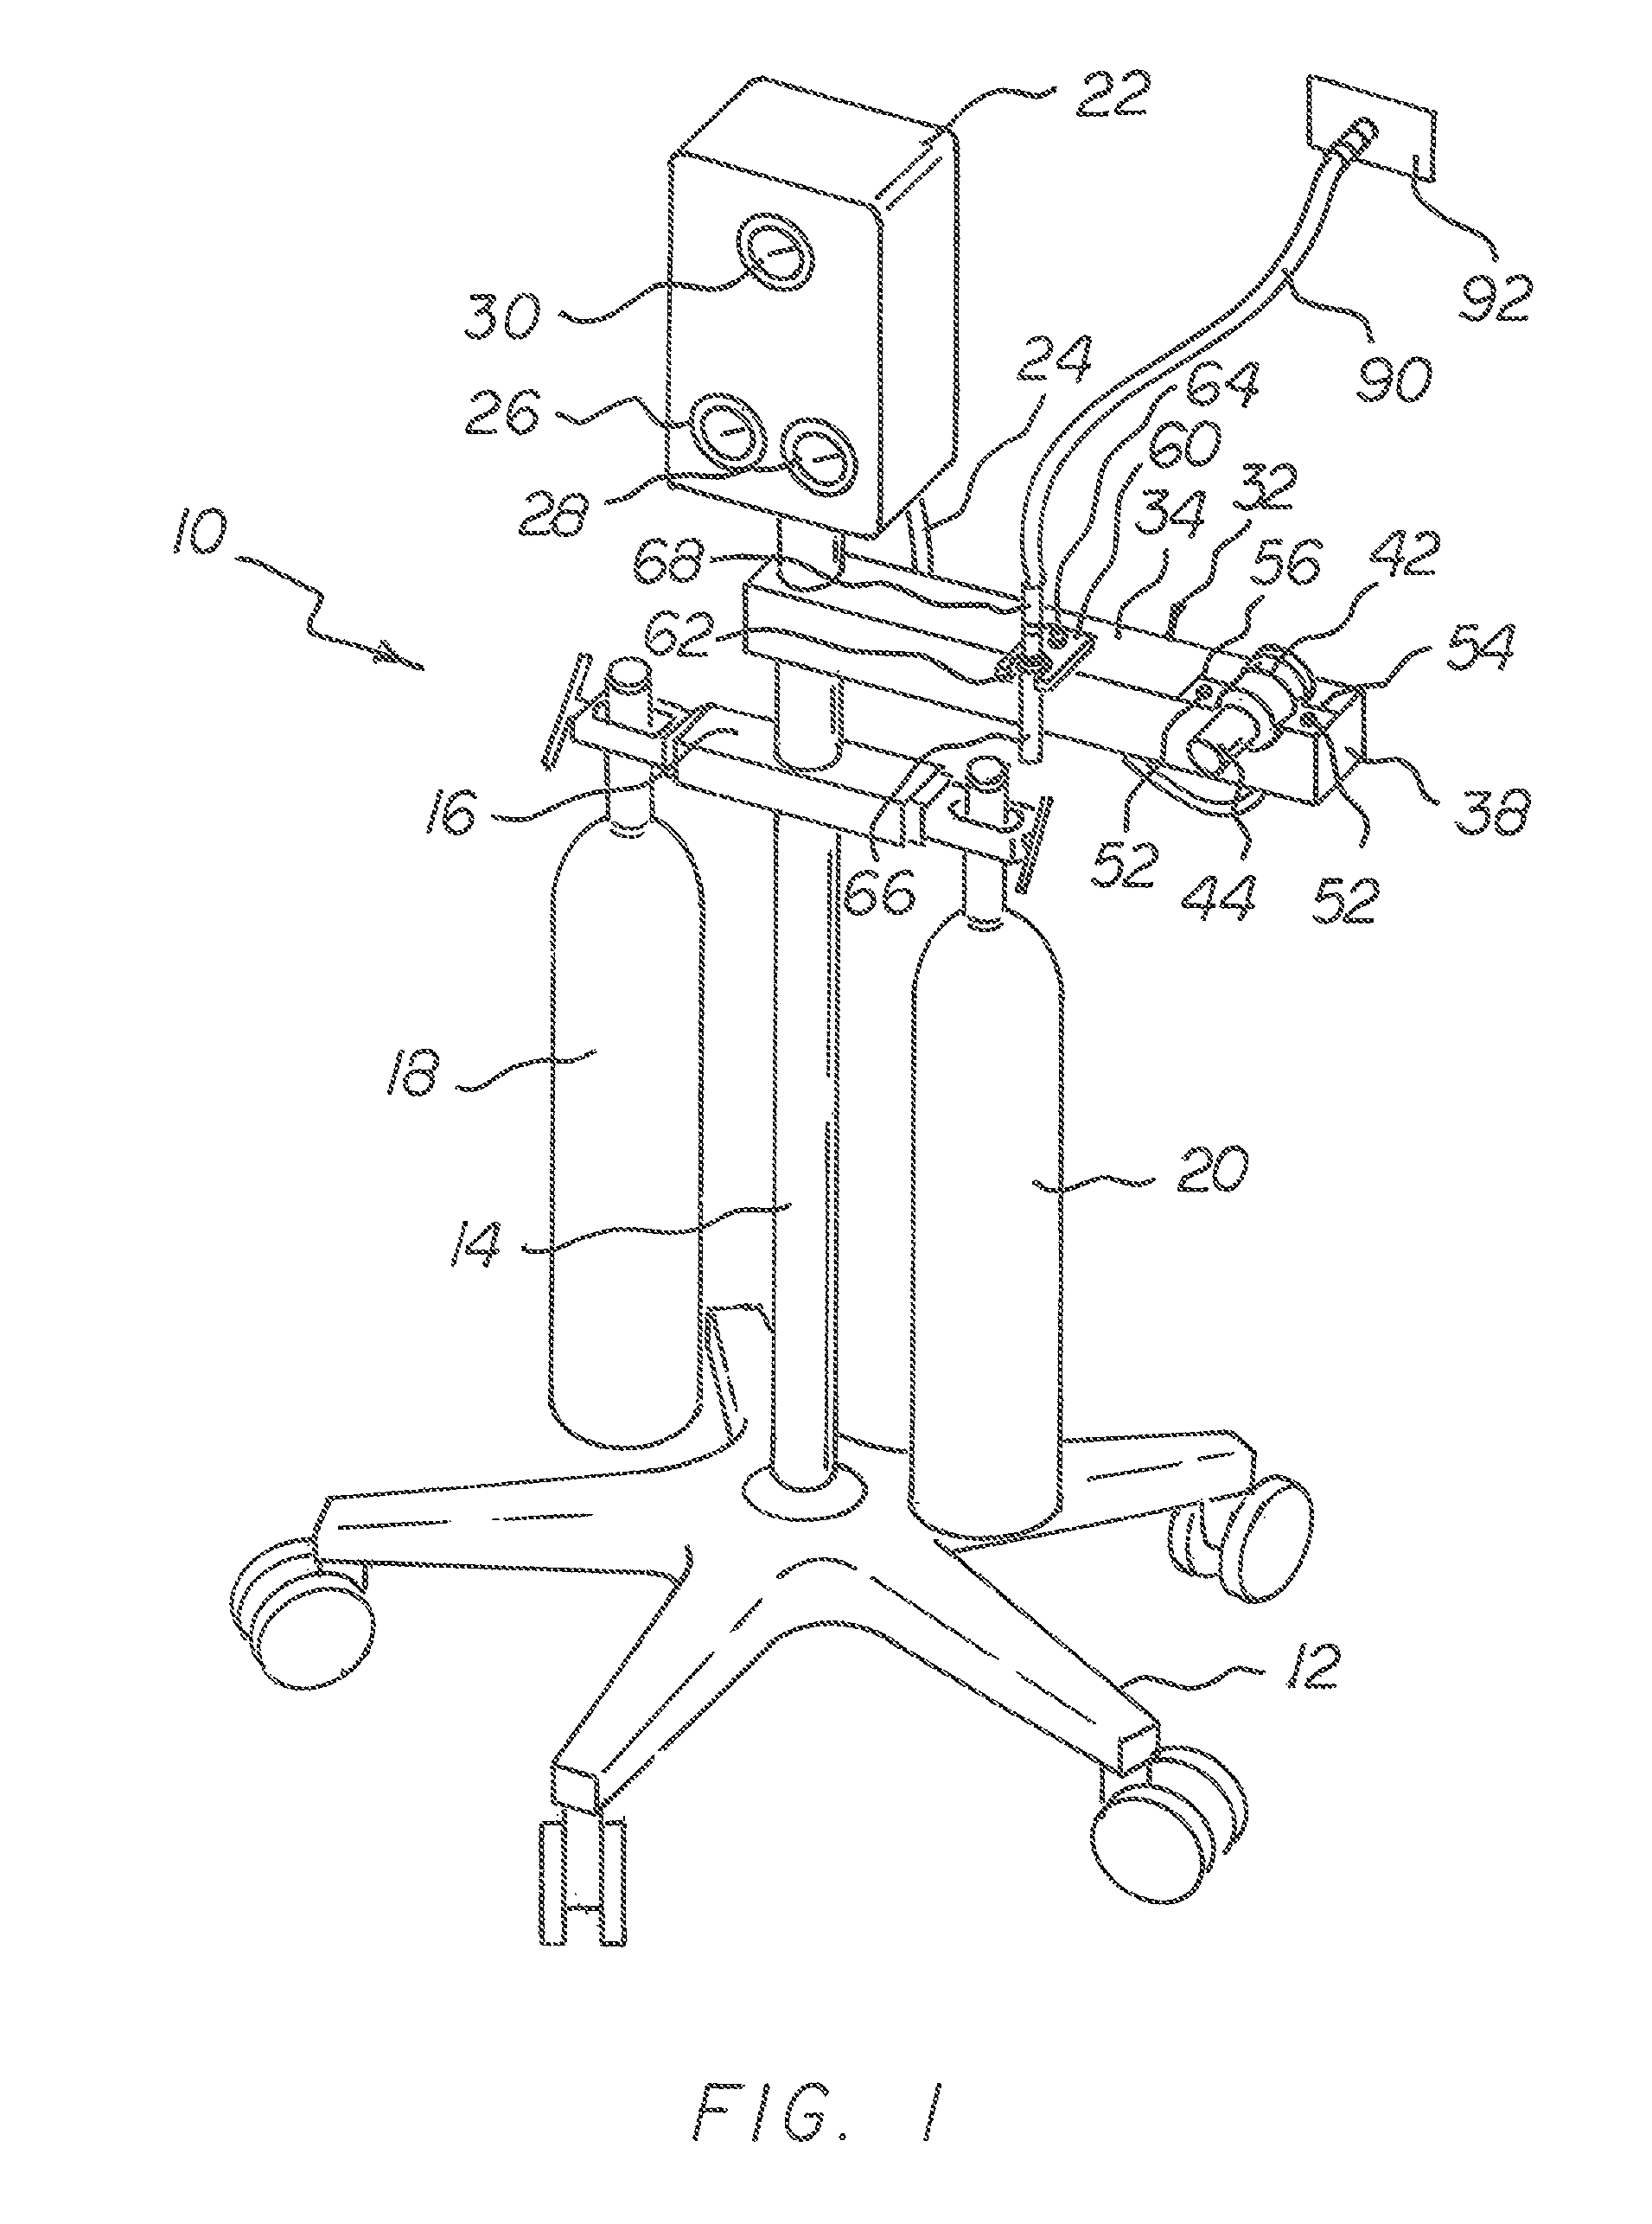 Demand anesthetic gas delivery system with disposable breathing and scavenging circuit